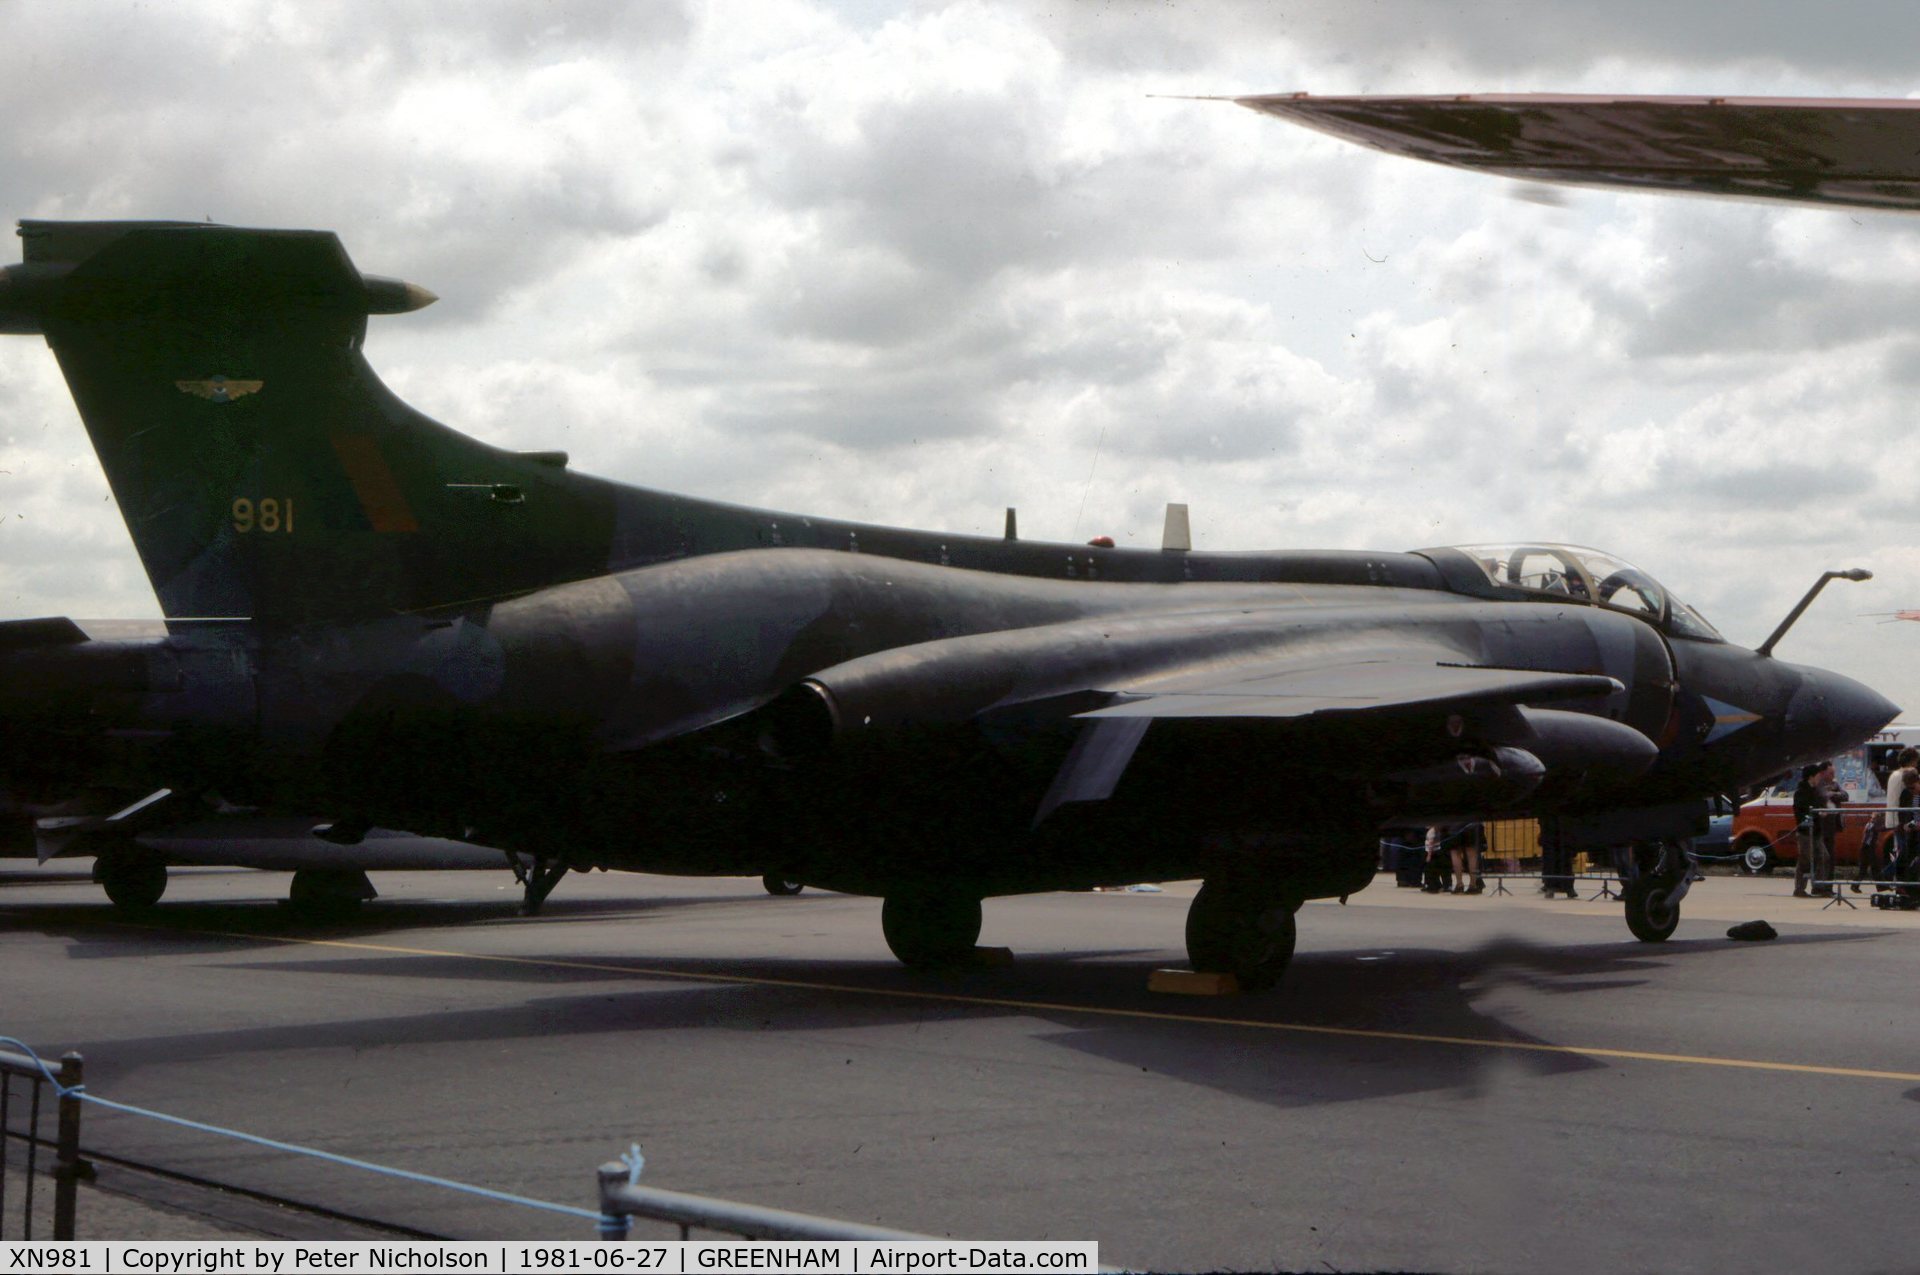 XN981, 1965 Hawker Siddeley Buccaneer S.2B C/N B3-08-63, Another view of the 208 Squadron Buccaneer S.2B at the 1981 Intnl Air Tattoo at RAF Greenham Common.